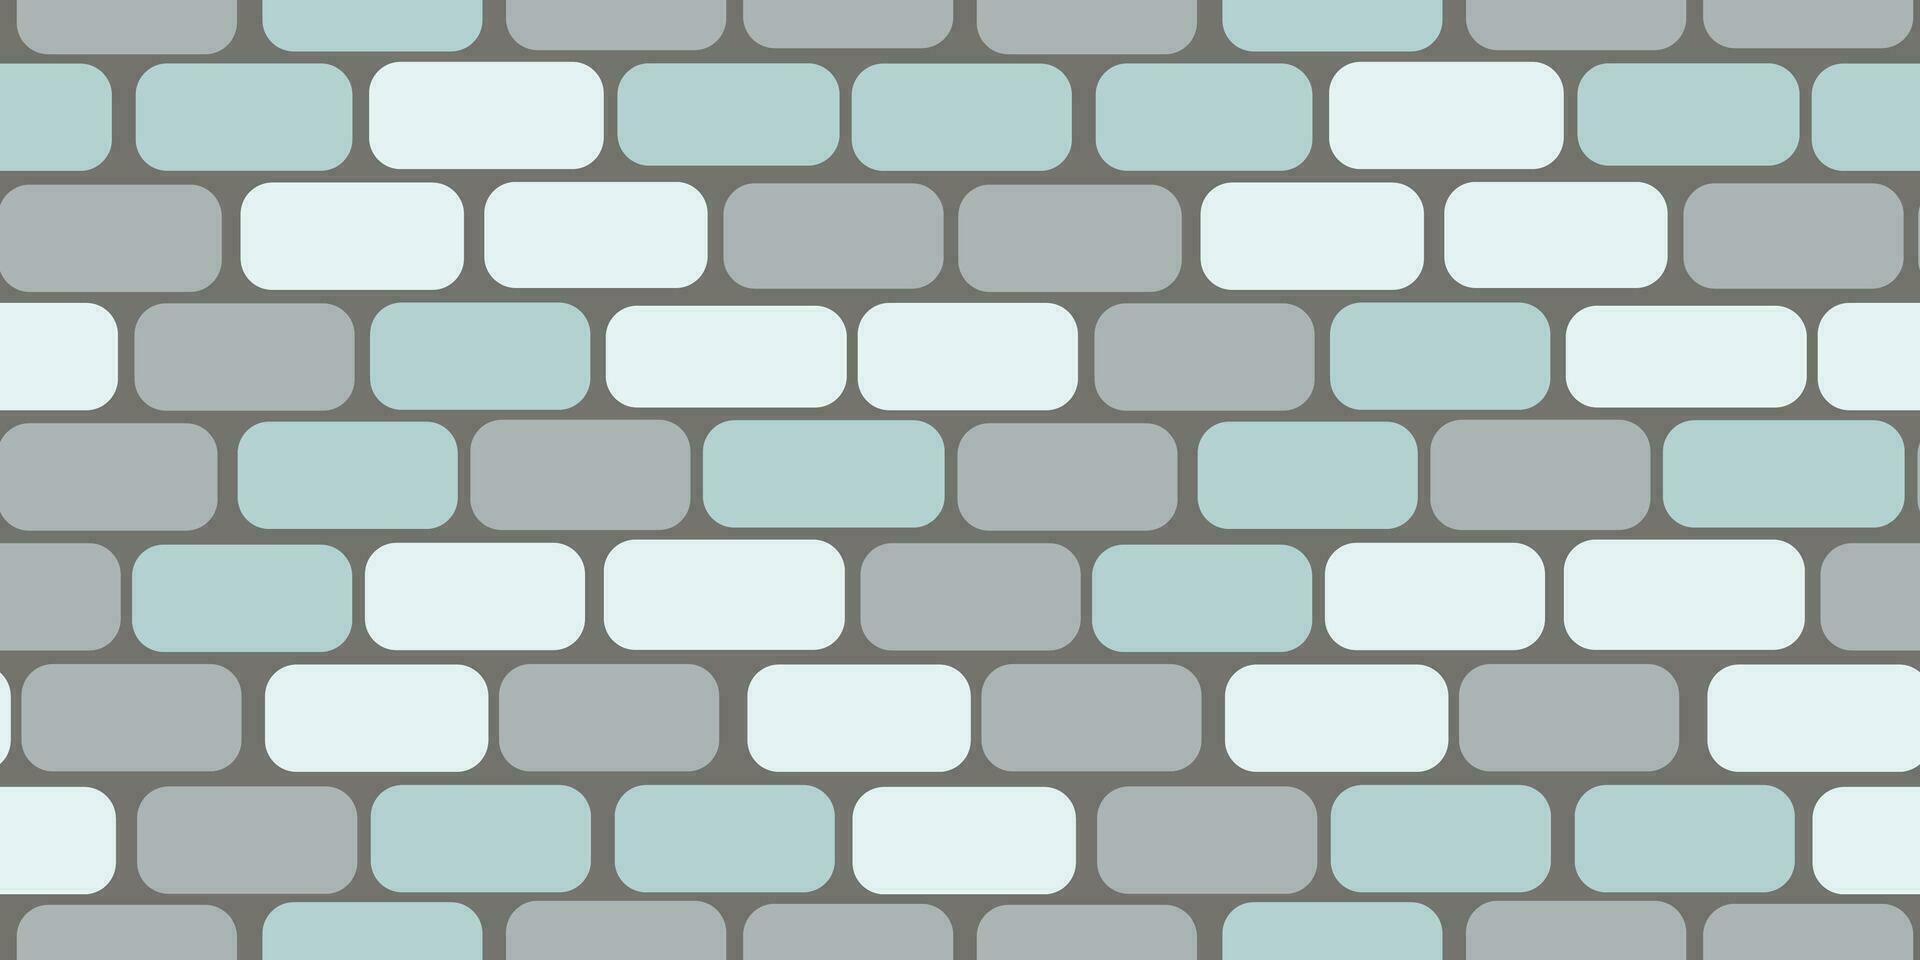 Brick wall. Construction, brickwork. Stone texture, vector pattern, abstract background, banner.  Dynamic colors, geometric shapes. Template for design of web banner, flyer.